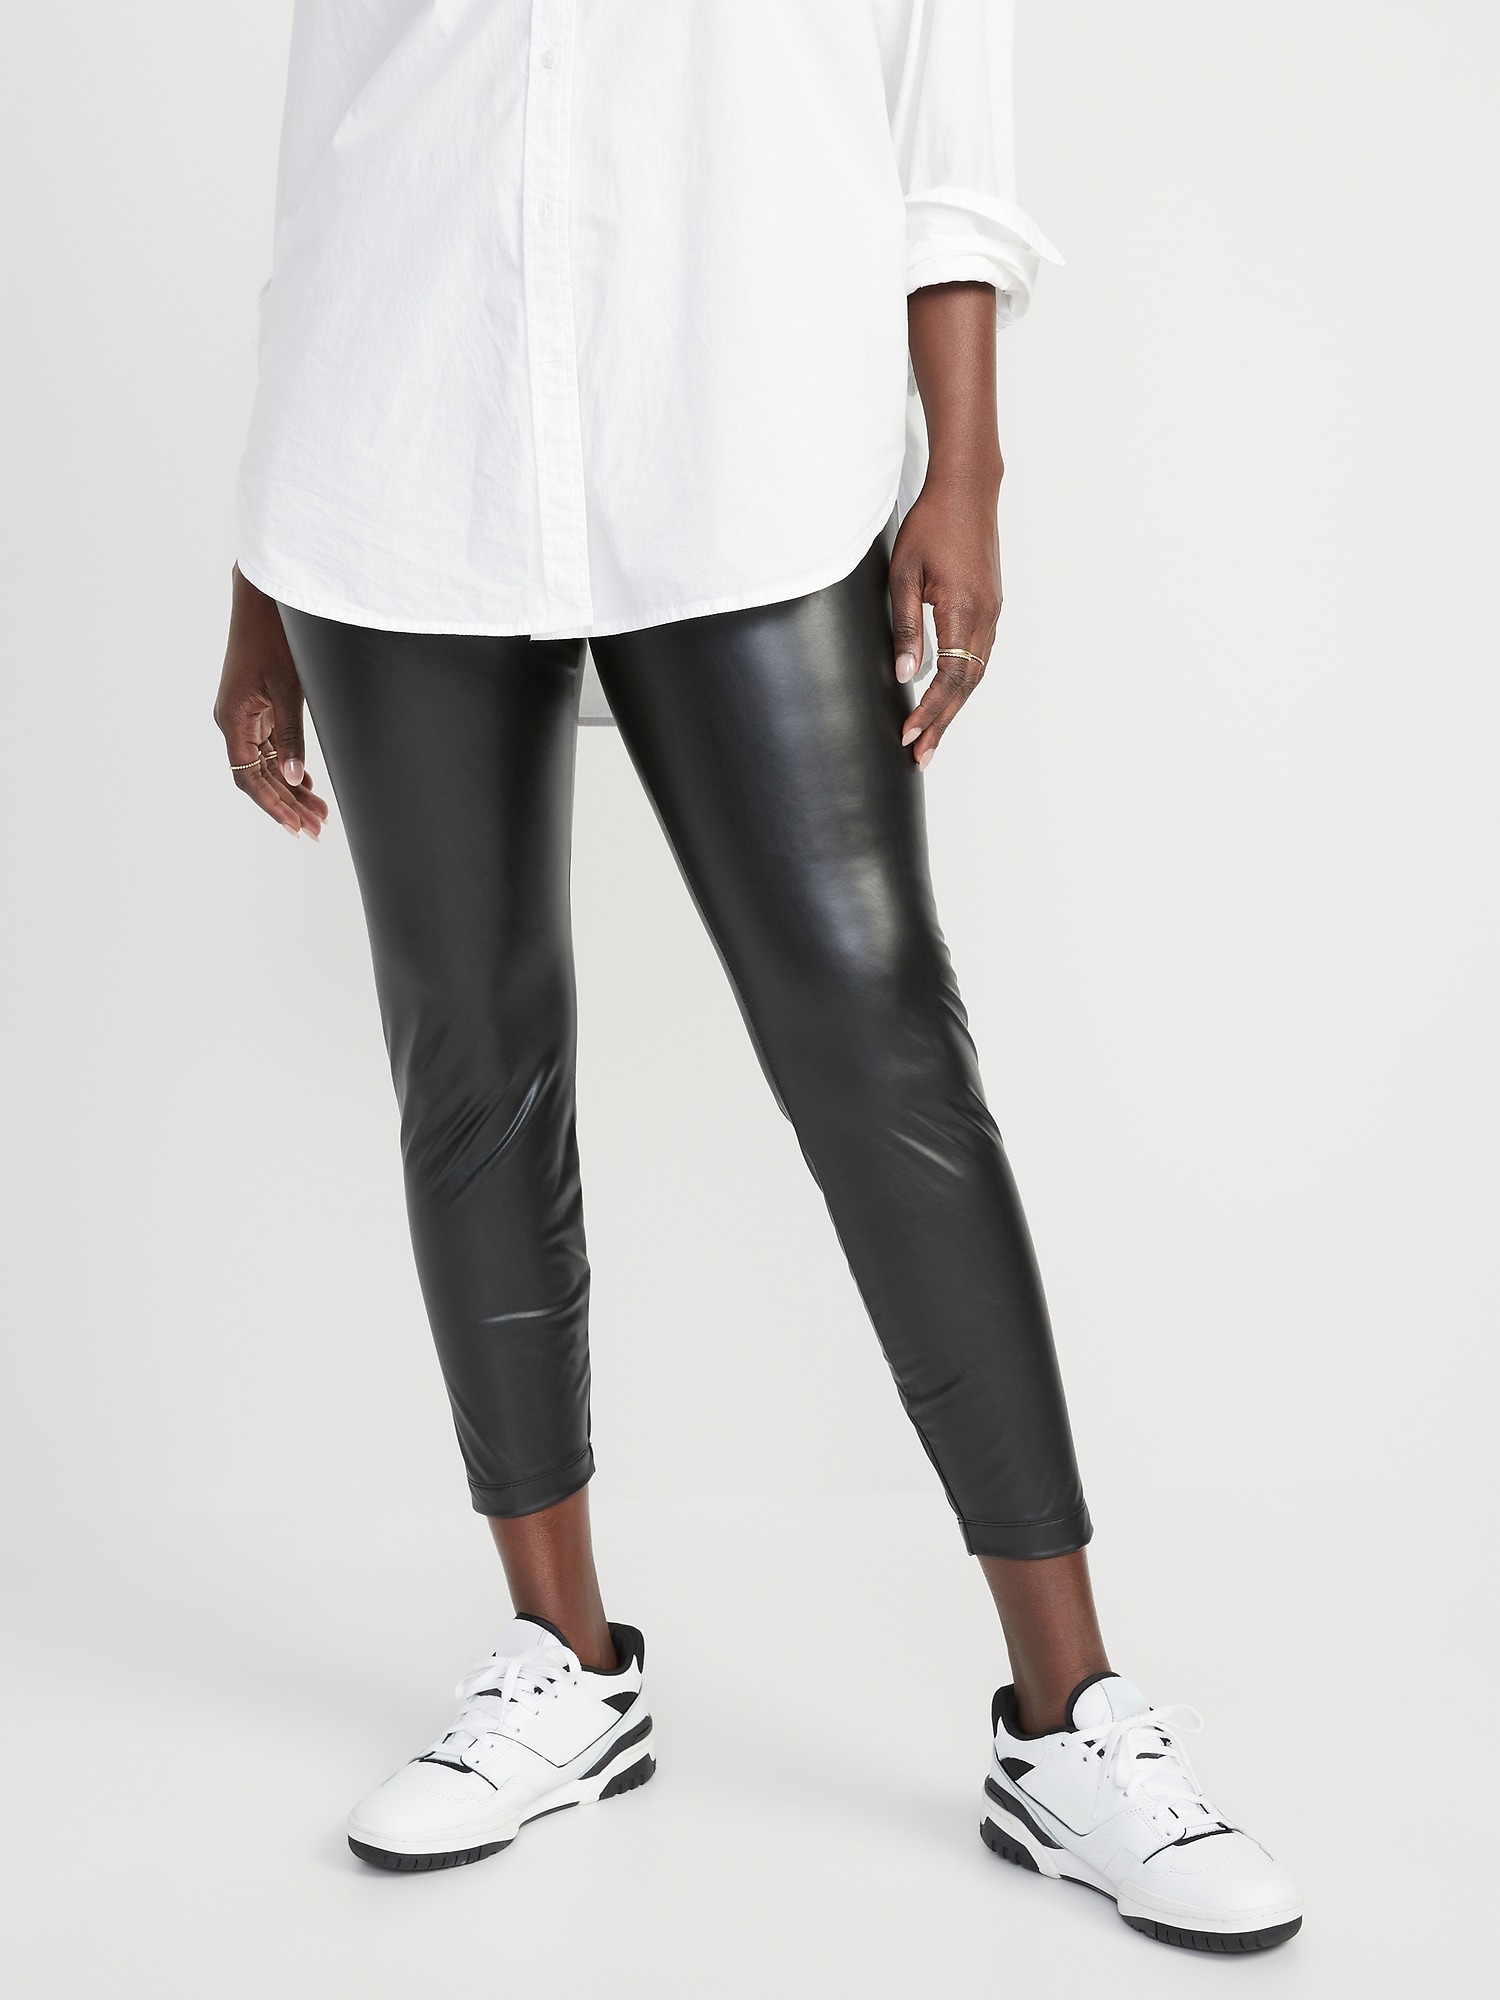 Women's Ruched Pants Faux leather Leggings Super Cute and Comfy